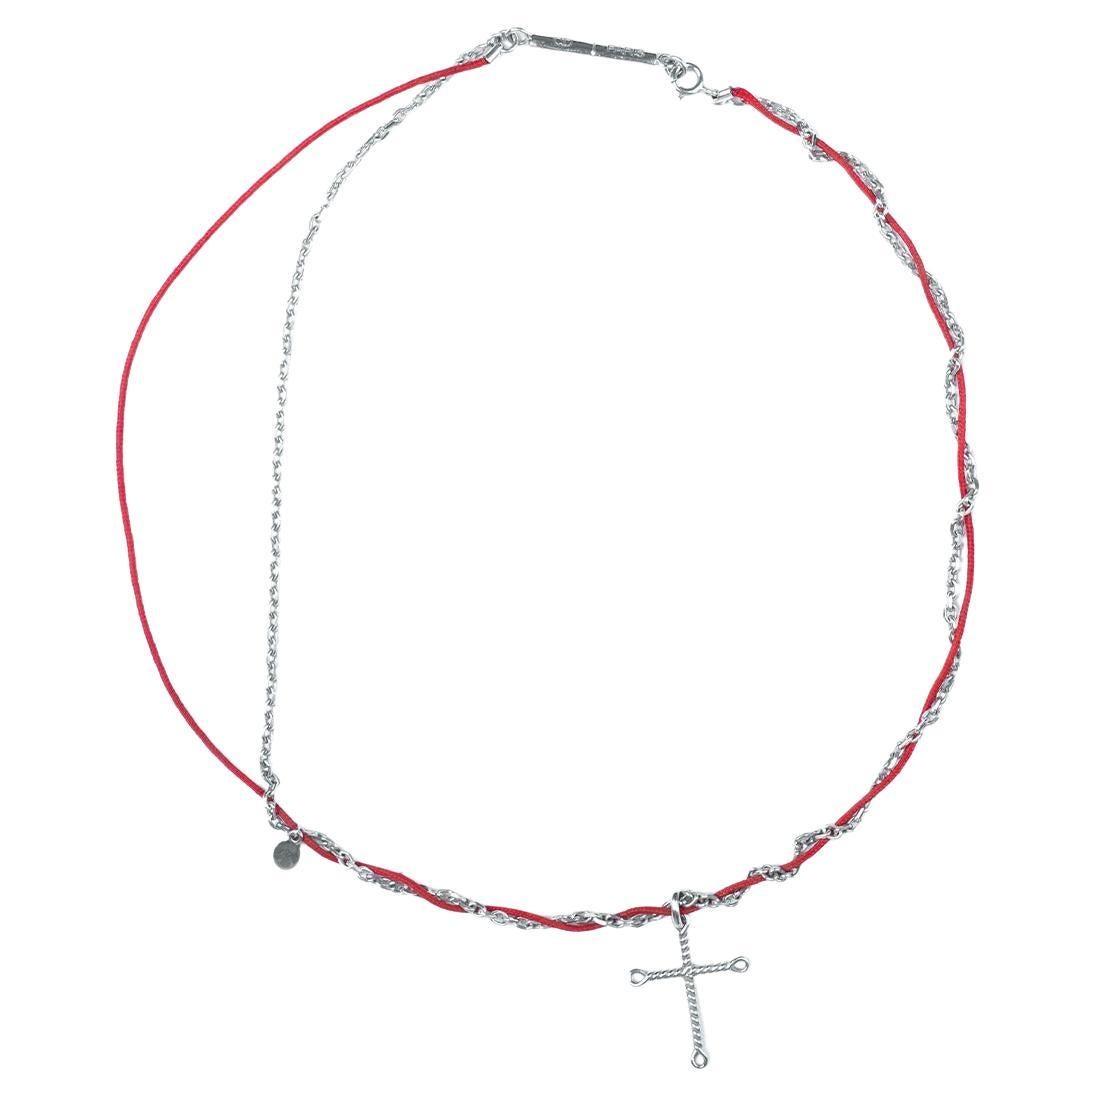 Dior Homme AW2005 .925 Wrapped Cross Necklace